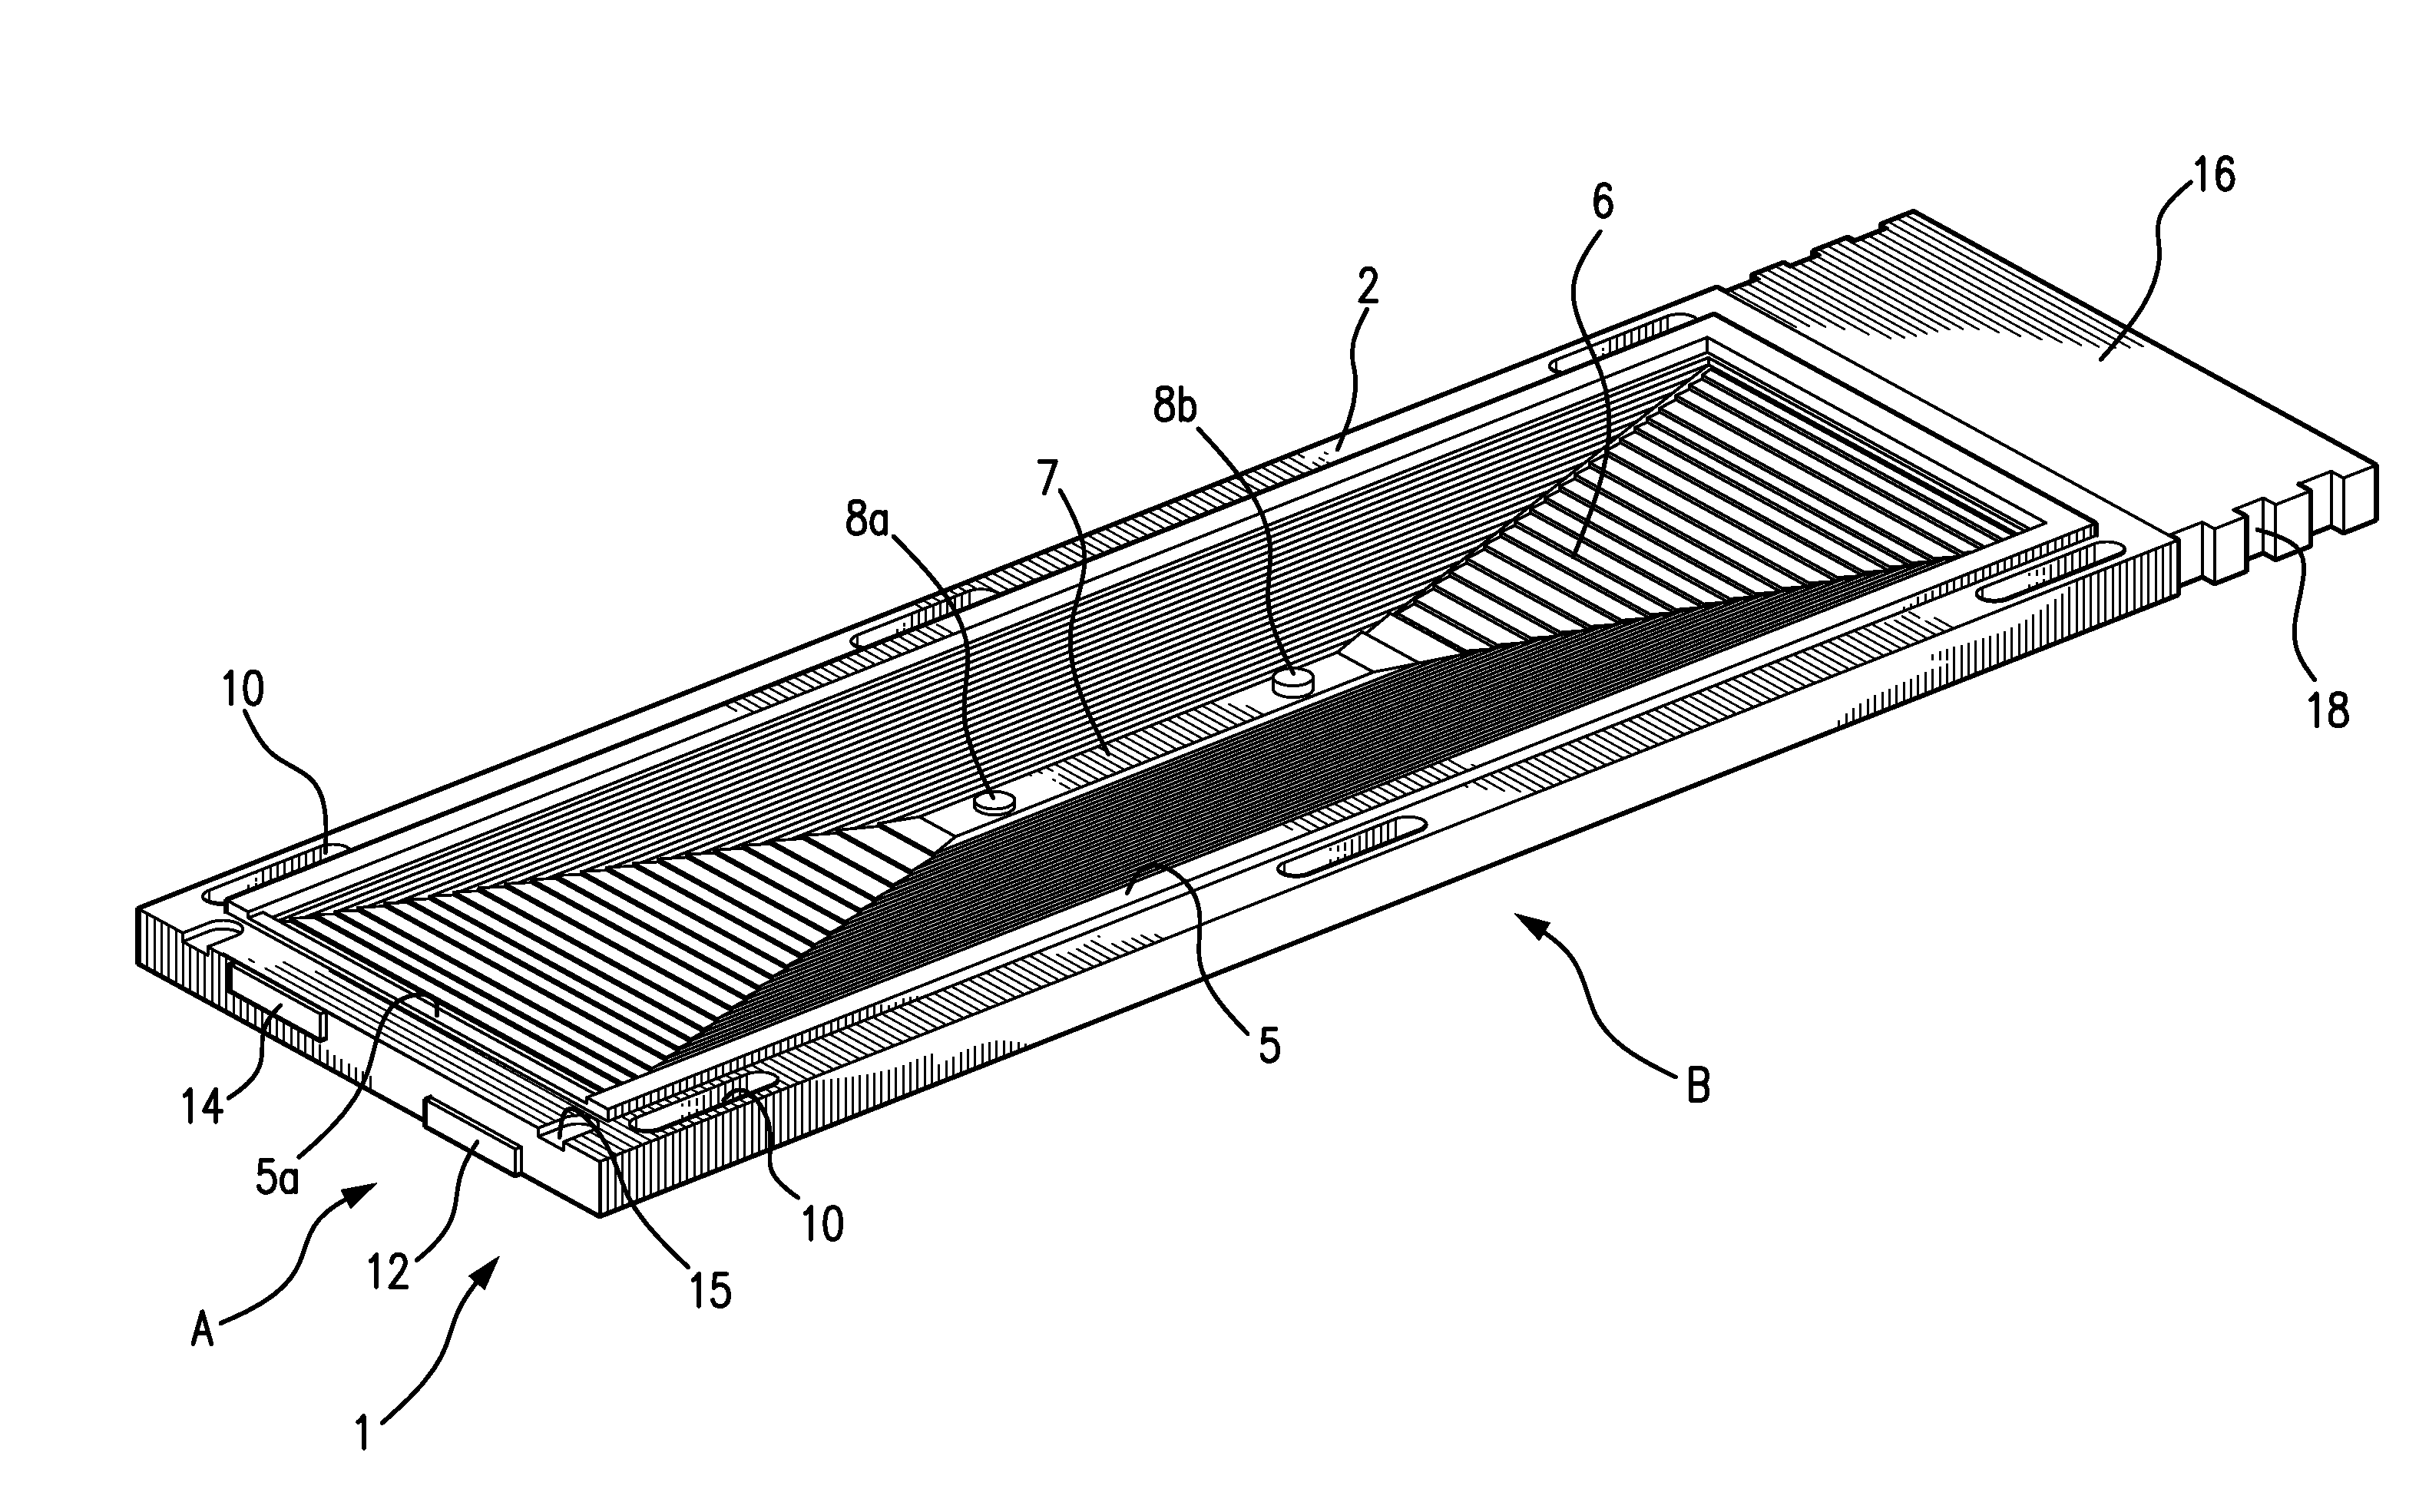 Tray for collecting and/or treating decomposition fluids from a corpse